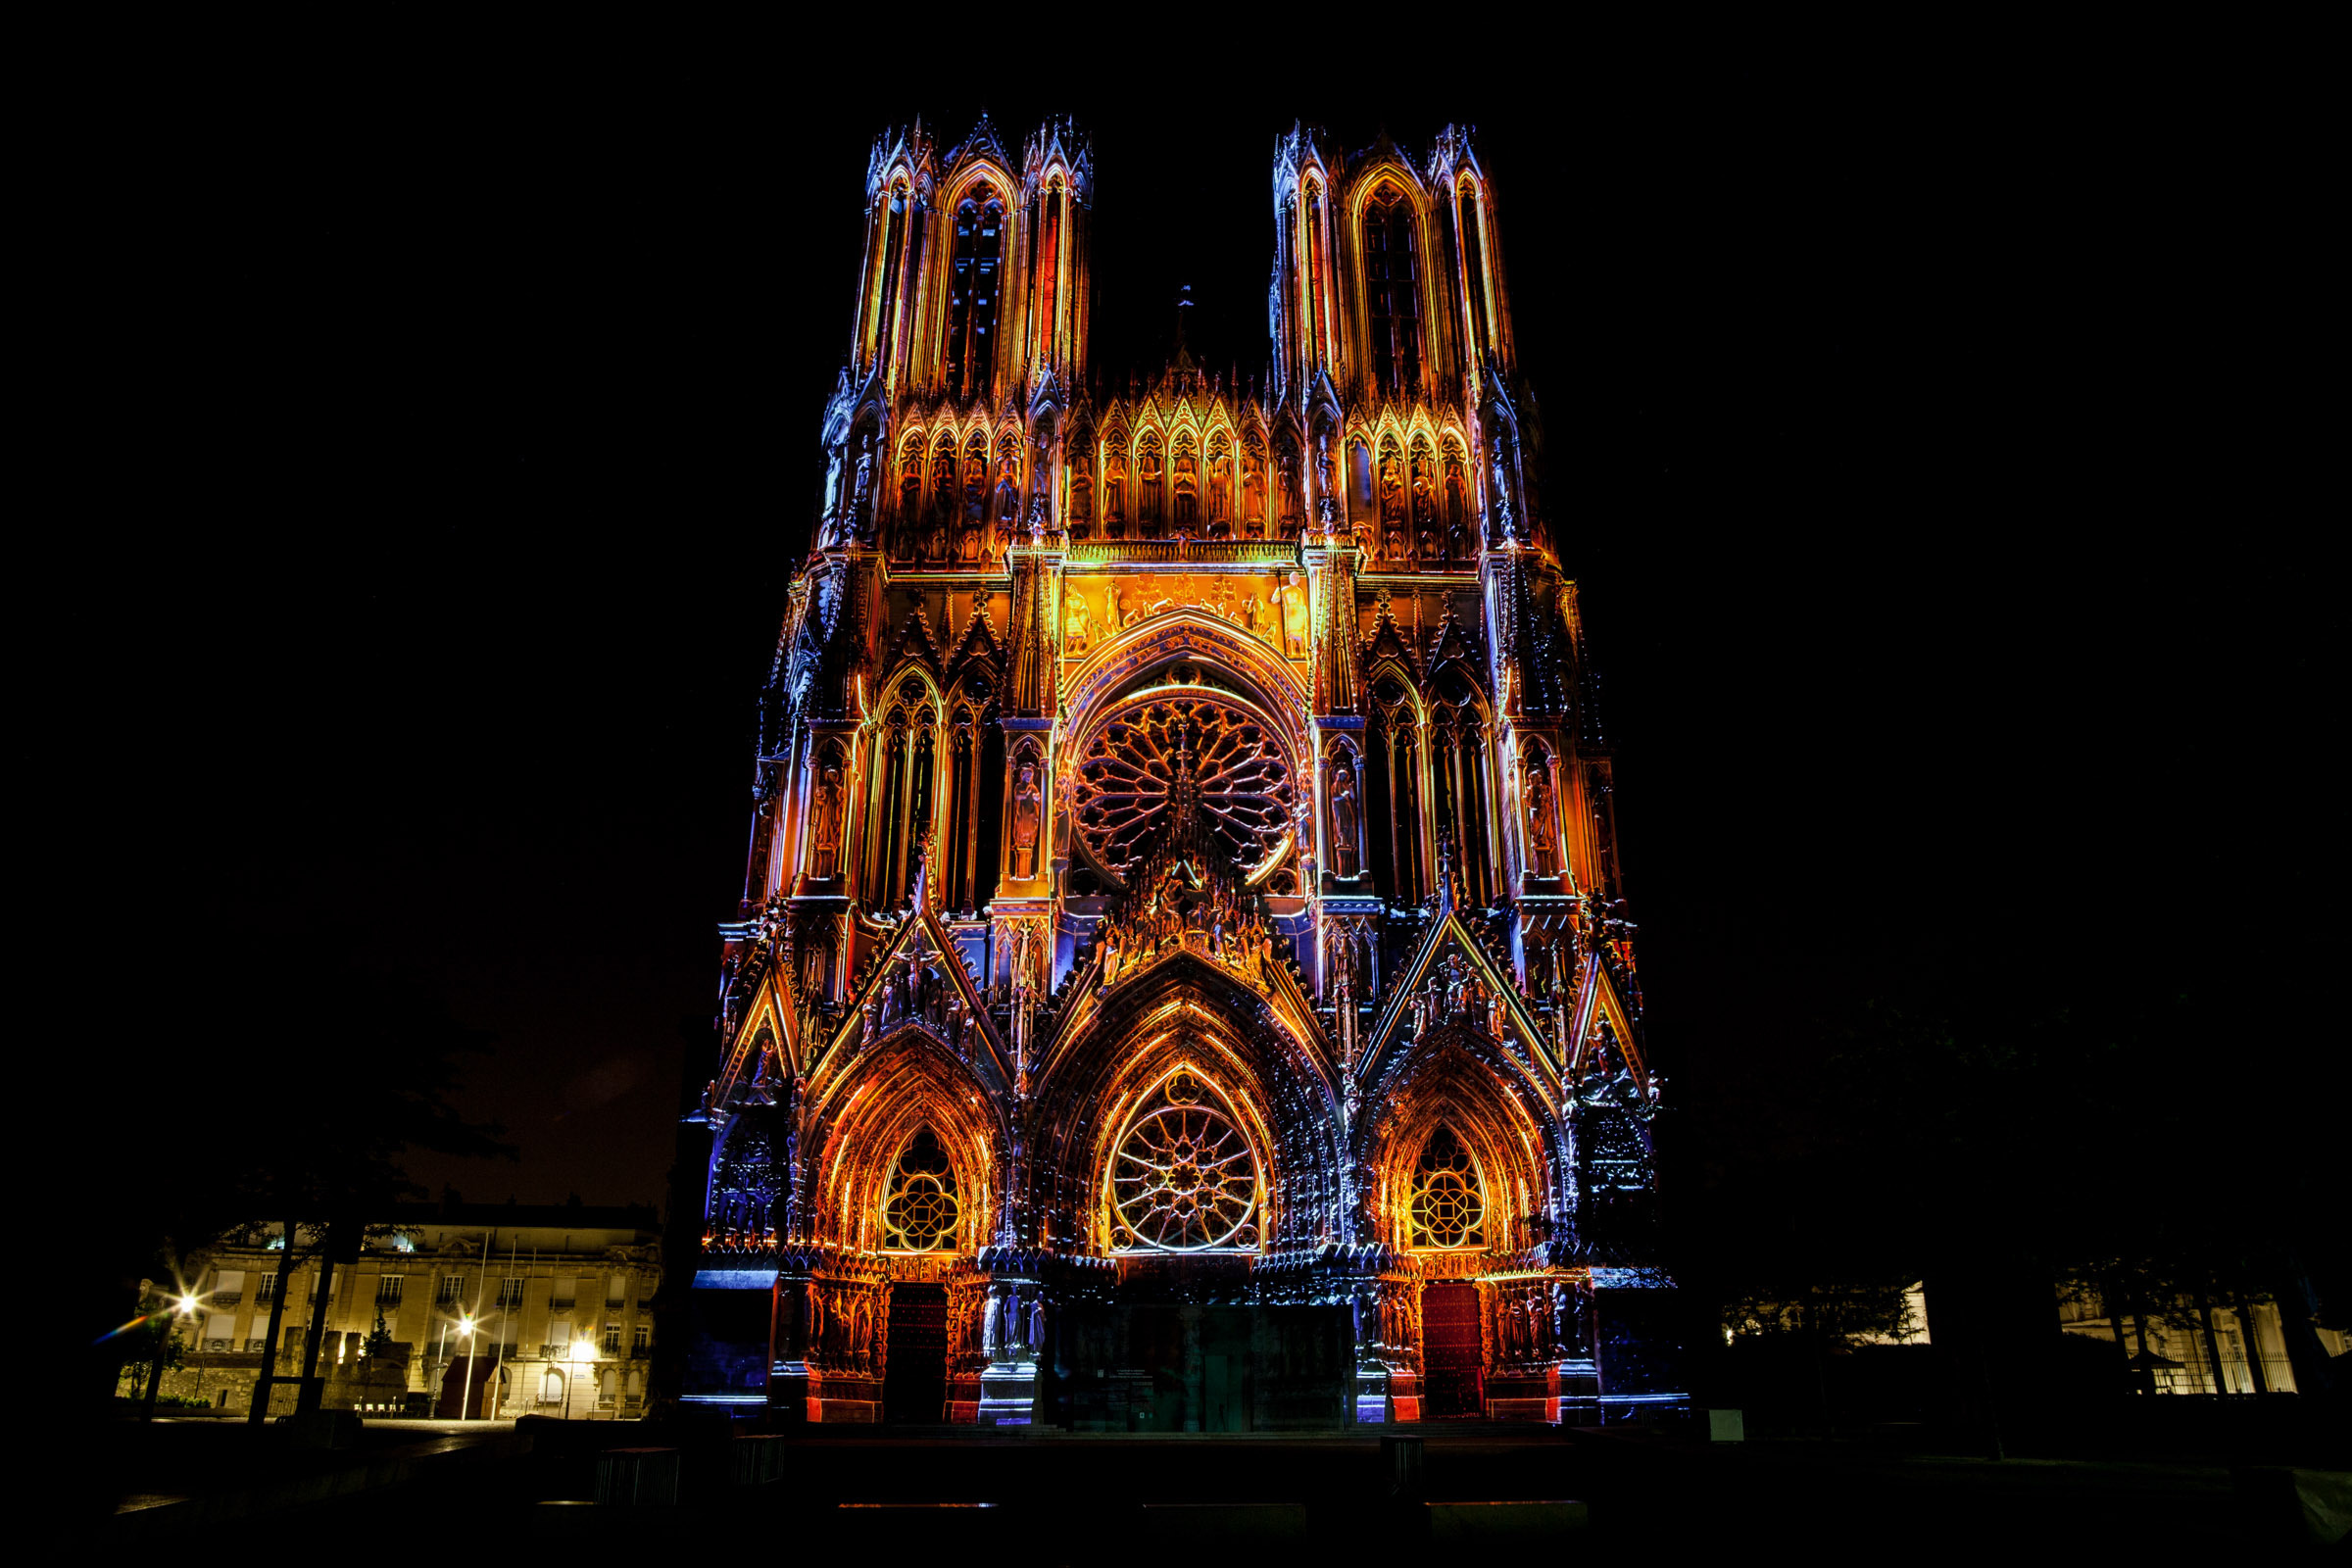 Regalia at the Reims Cathedral - CODAworx